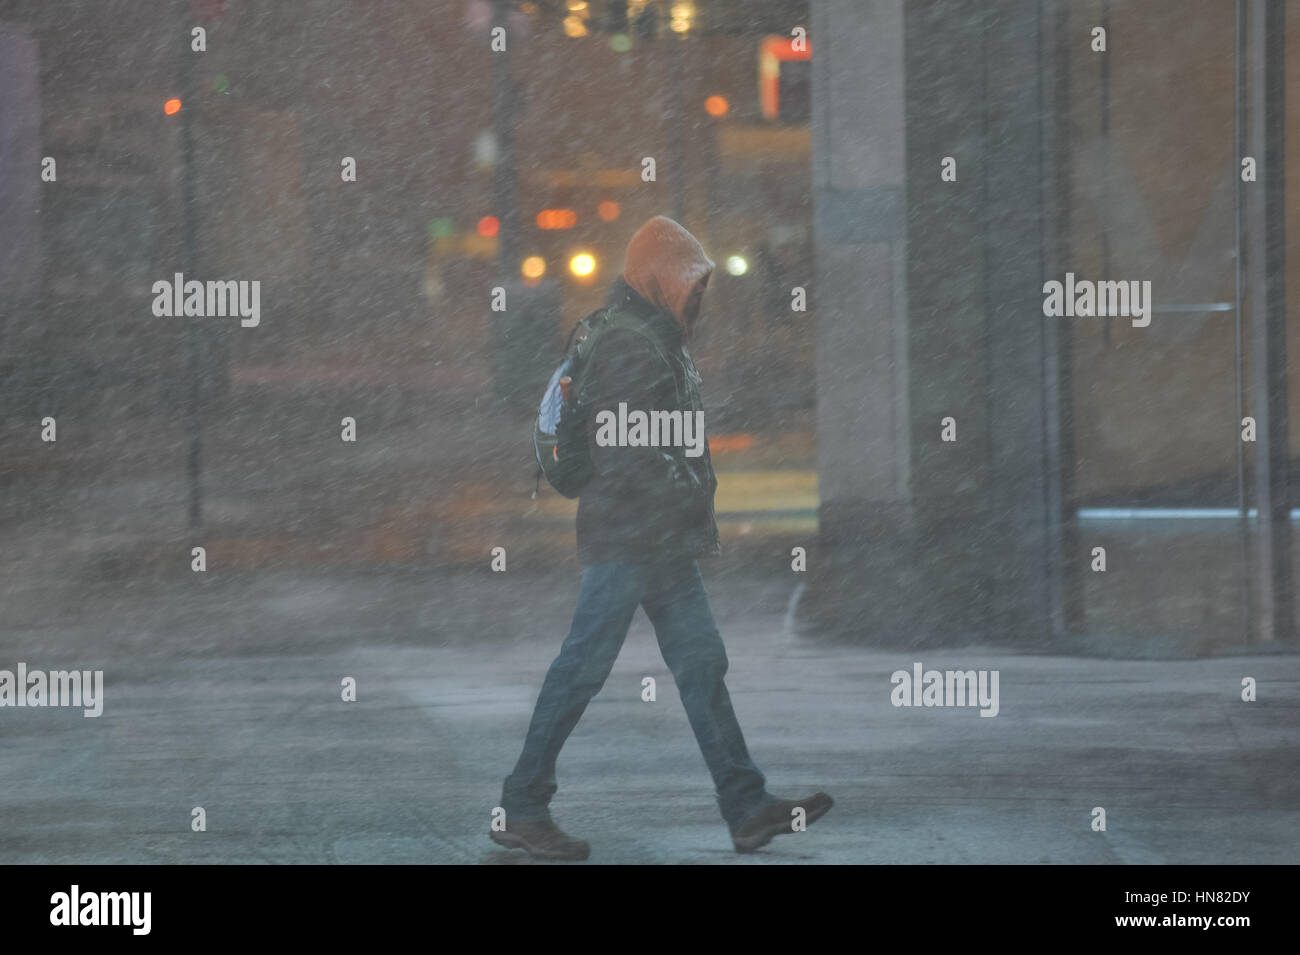 New York, USA. 9th Feb, 2017. Snowstorm in Manhattan. Schools do not open today due to heavy snowfalls. All emergency services are on alert. New York, USA. 09 Feb, 2017. Credit: LUIZ ROBERTO LIMA/Alamy Live News Stock Photo